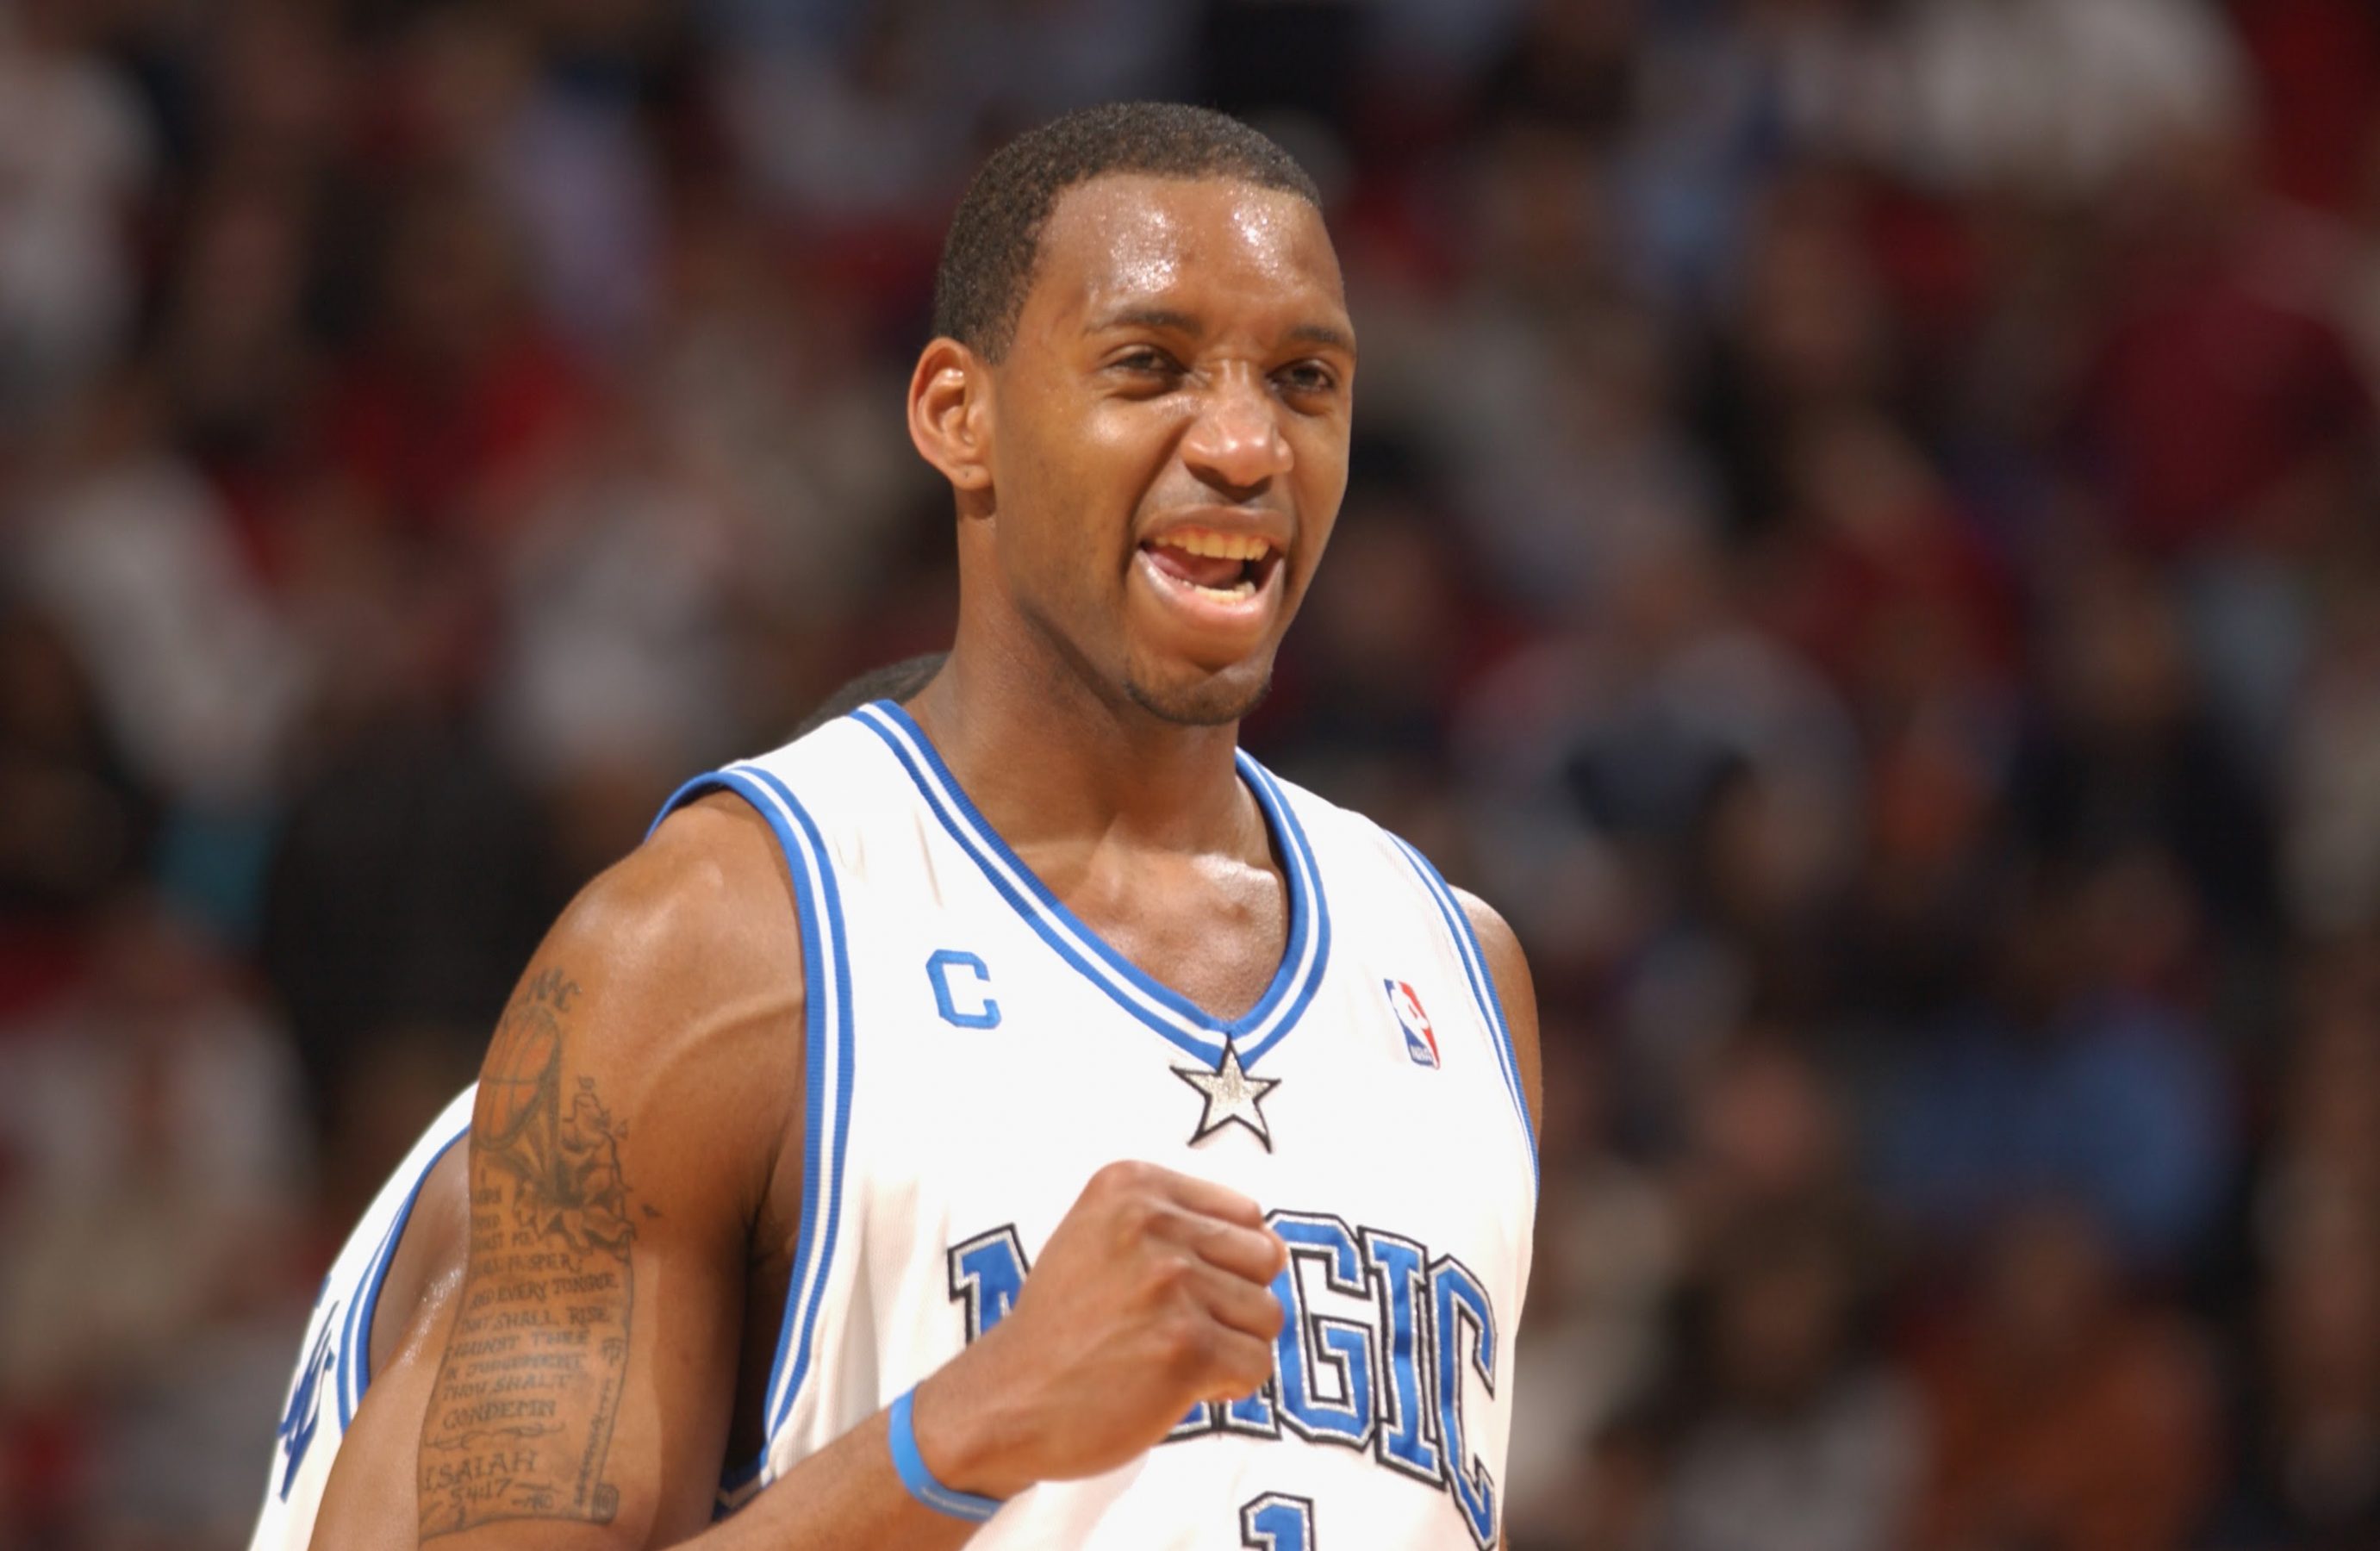 Tracy McGrady joins the Spurs - College News